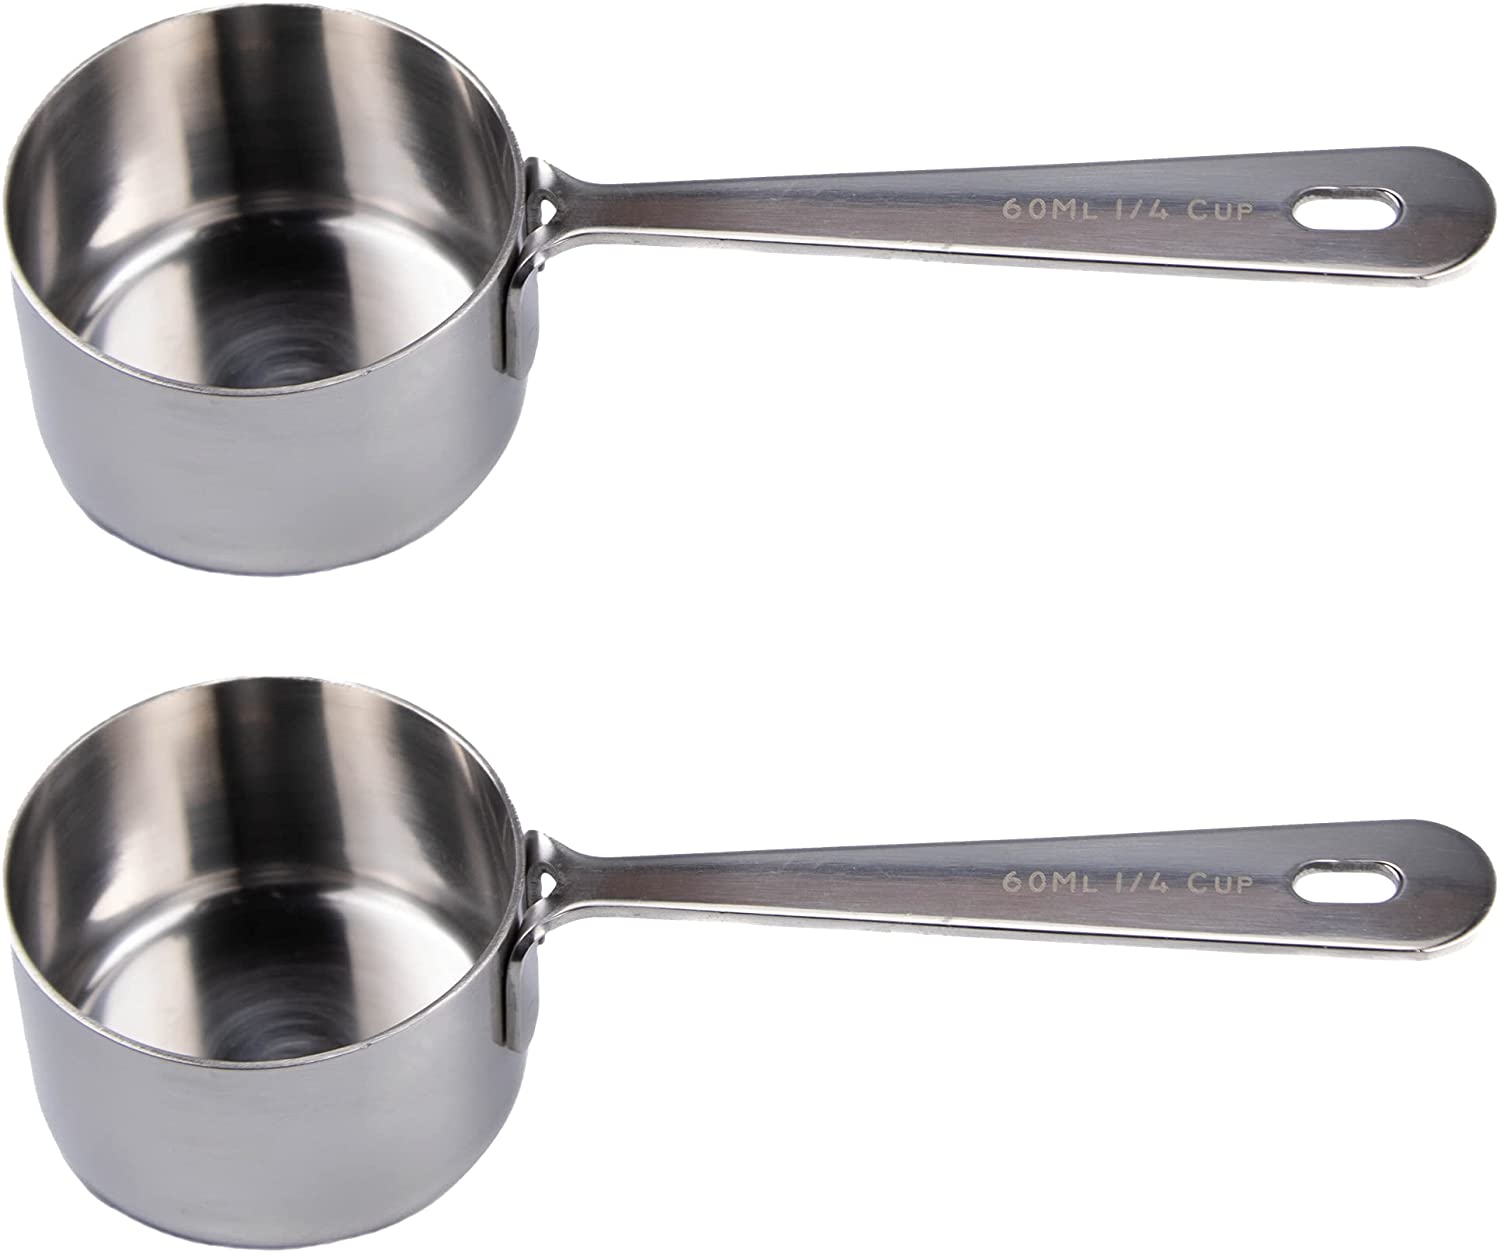 Honey Bear Kitchen 1/4 Cup 60 ml Leave-In Measuring Scoop Cups v2, Polished Stainless Steel (Set of 2)